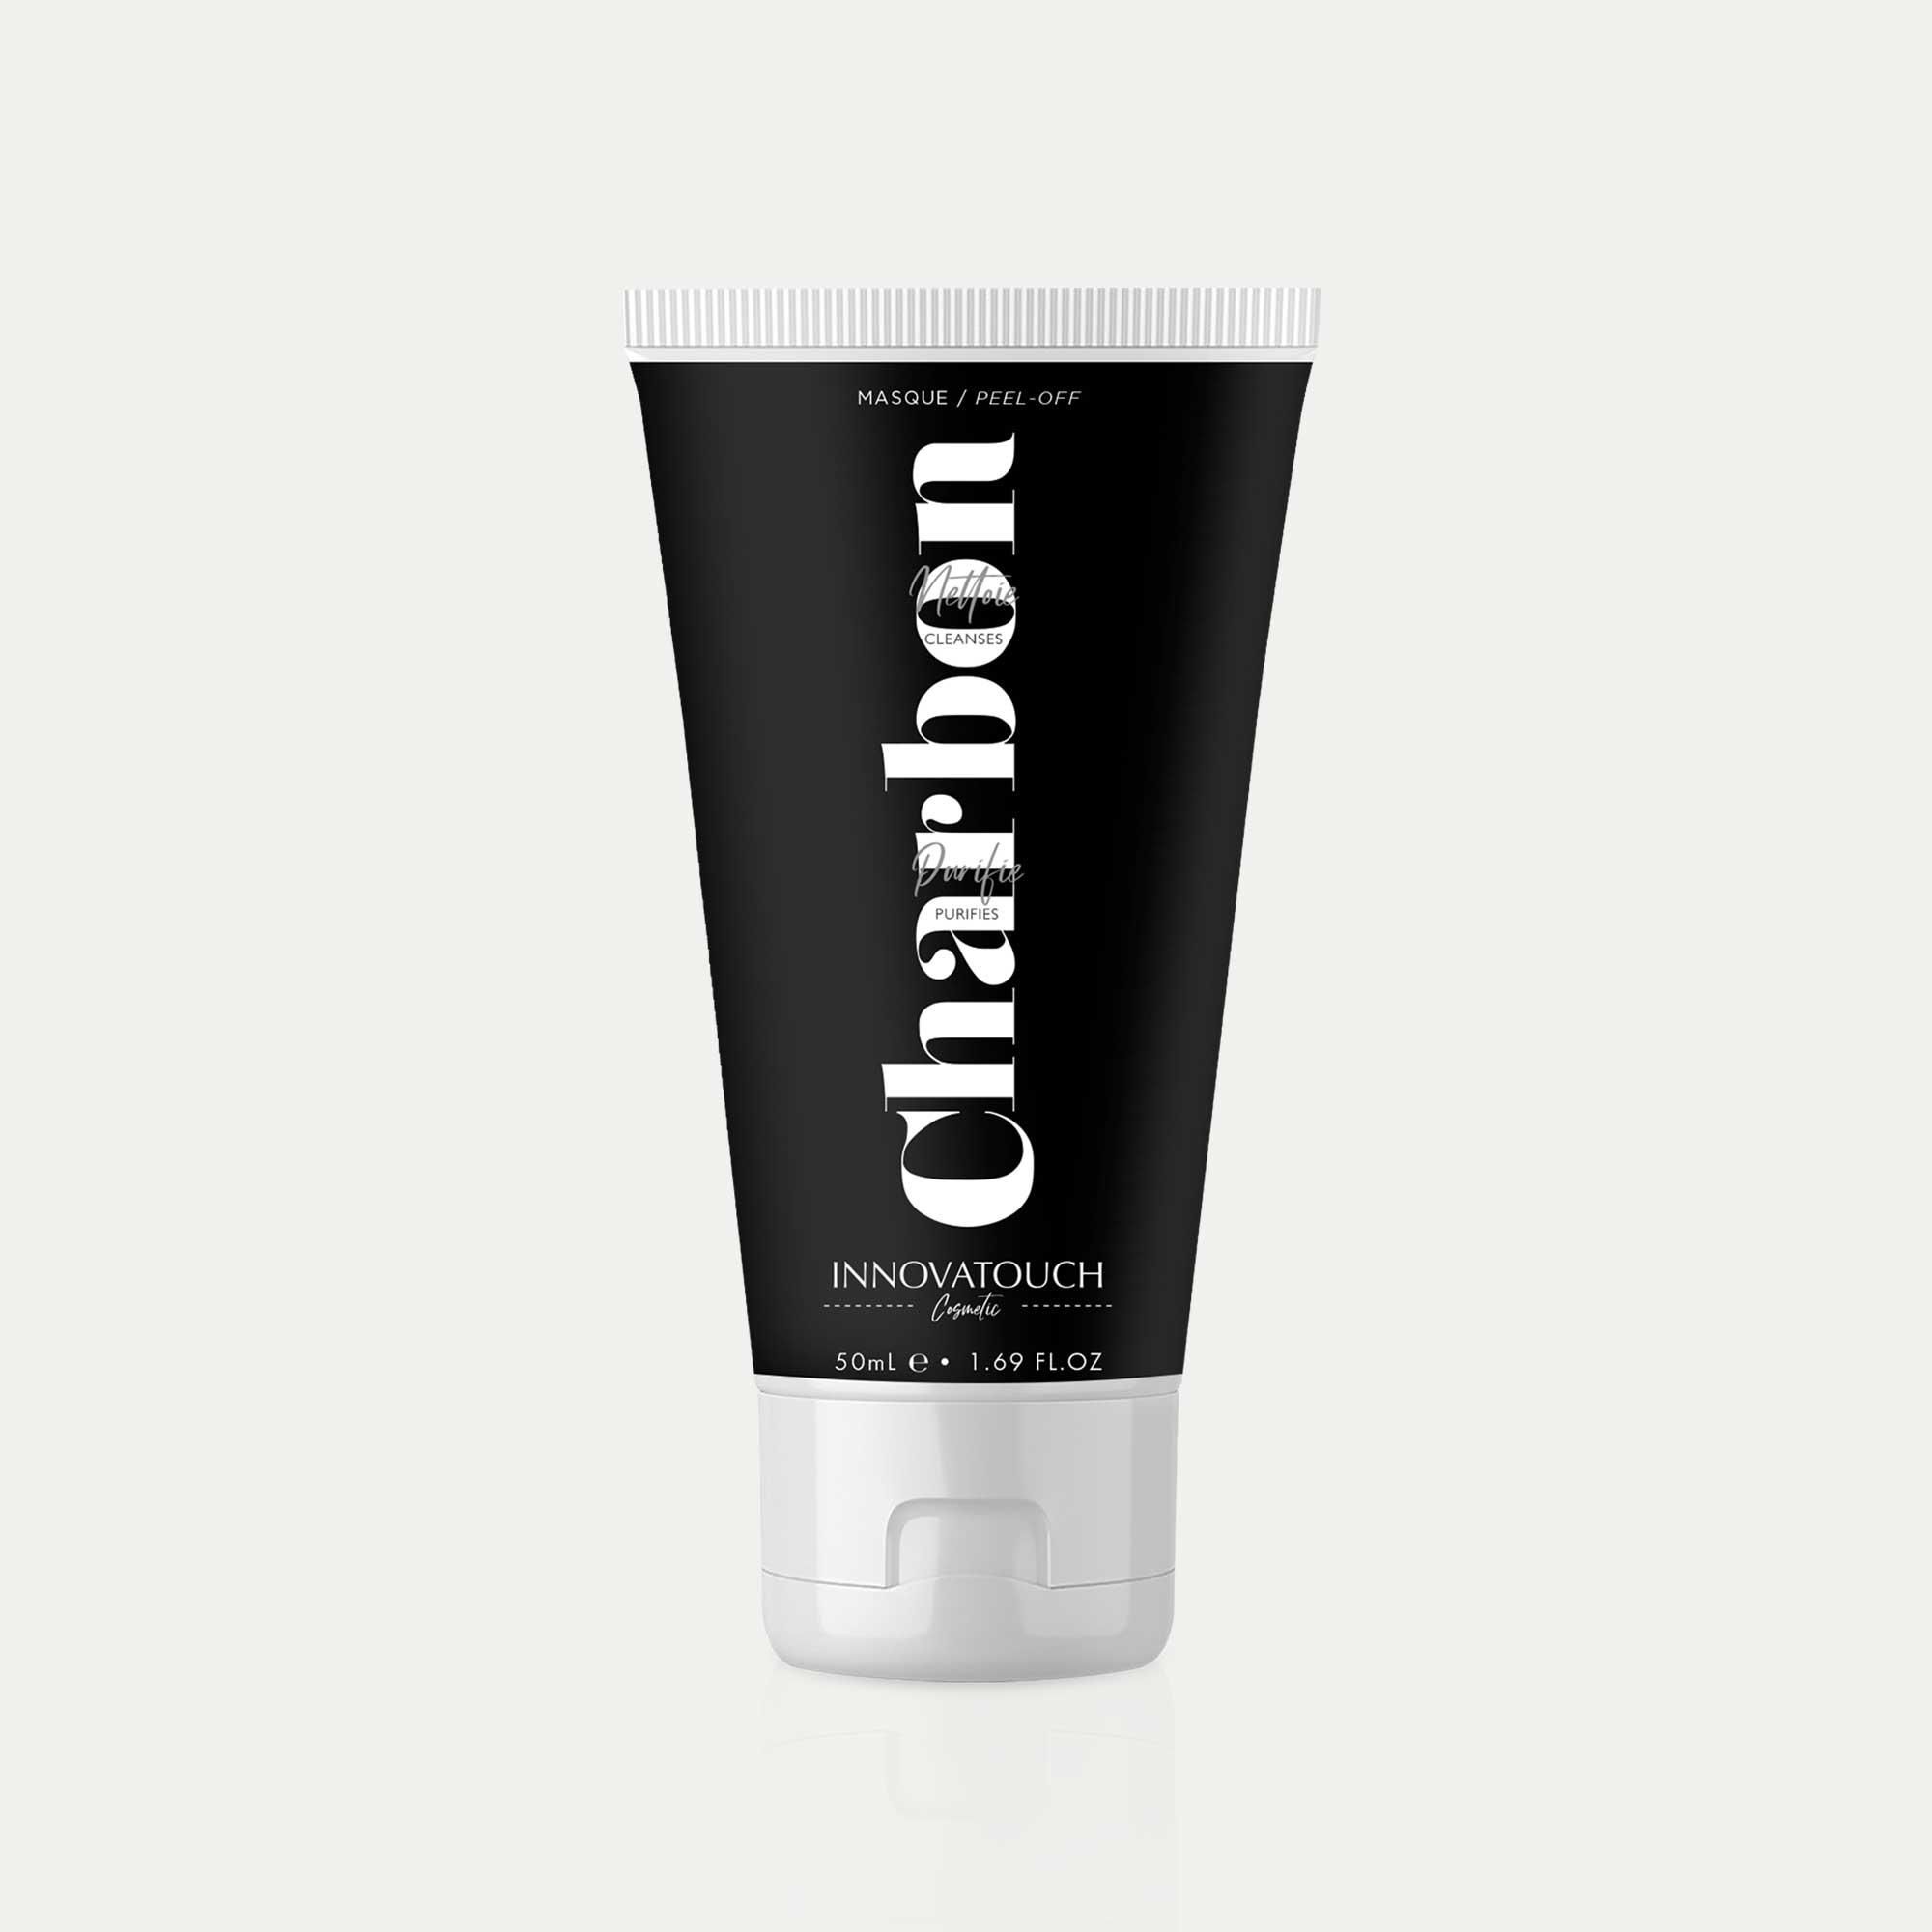 CHARBON-masque-peel-off-innovatouch-cosmetic